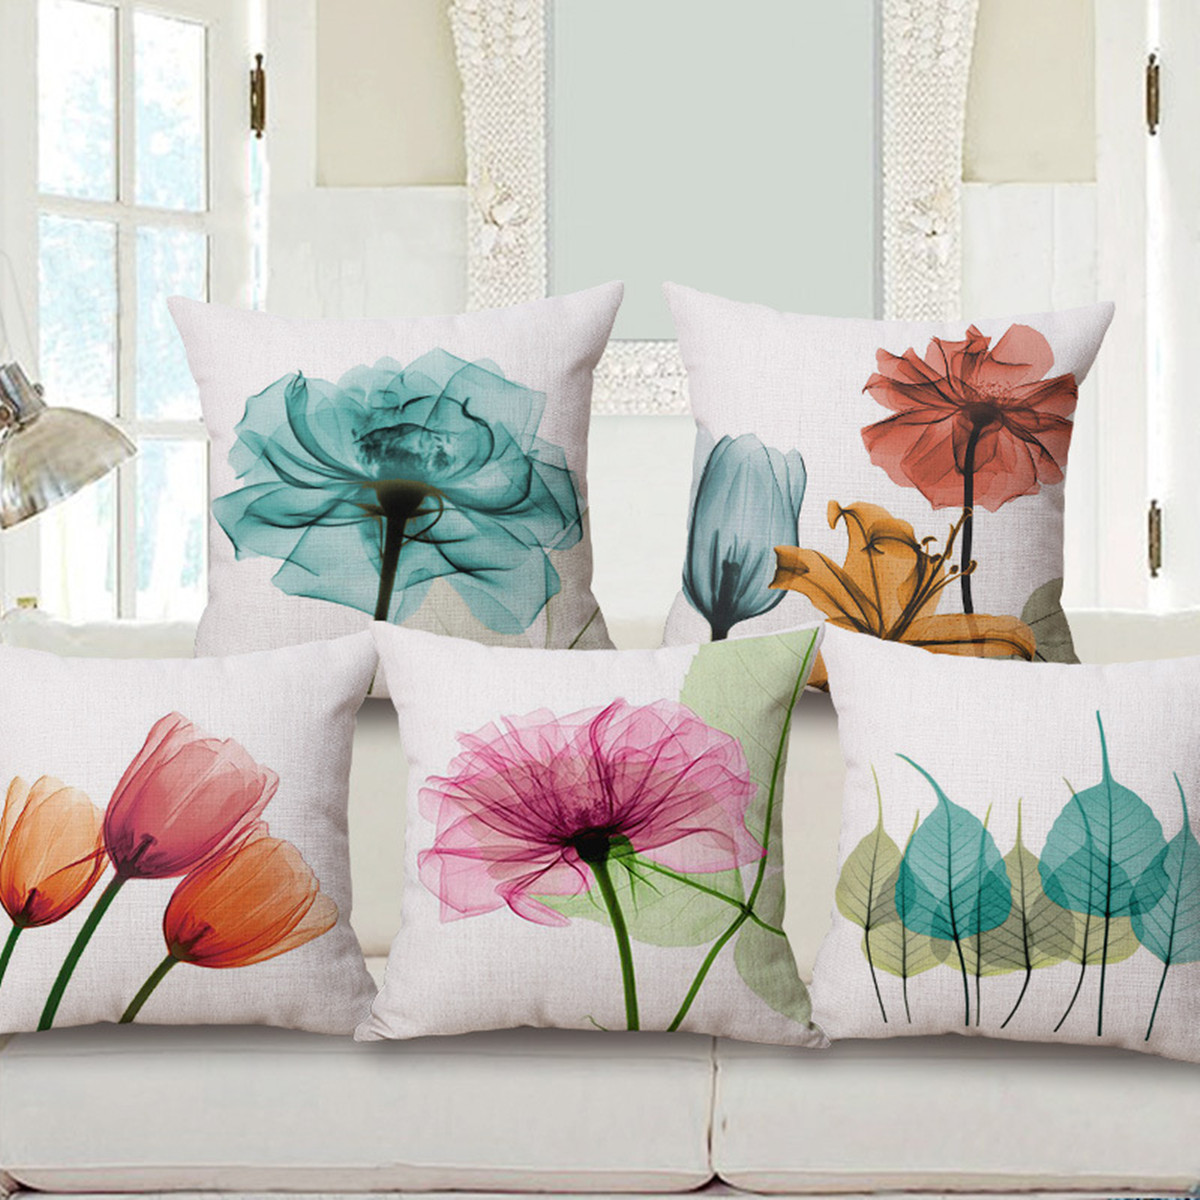 Ink-Painting-Flowers-Cotton-Linen-Pillow-Case-Tulips-Sofa-Cushion-Cover-45x45cm-1161674-2